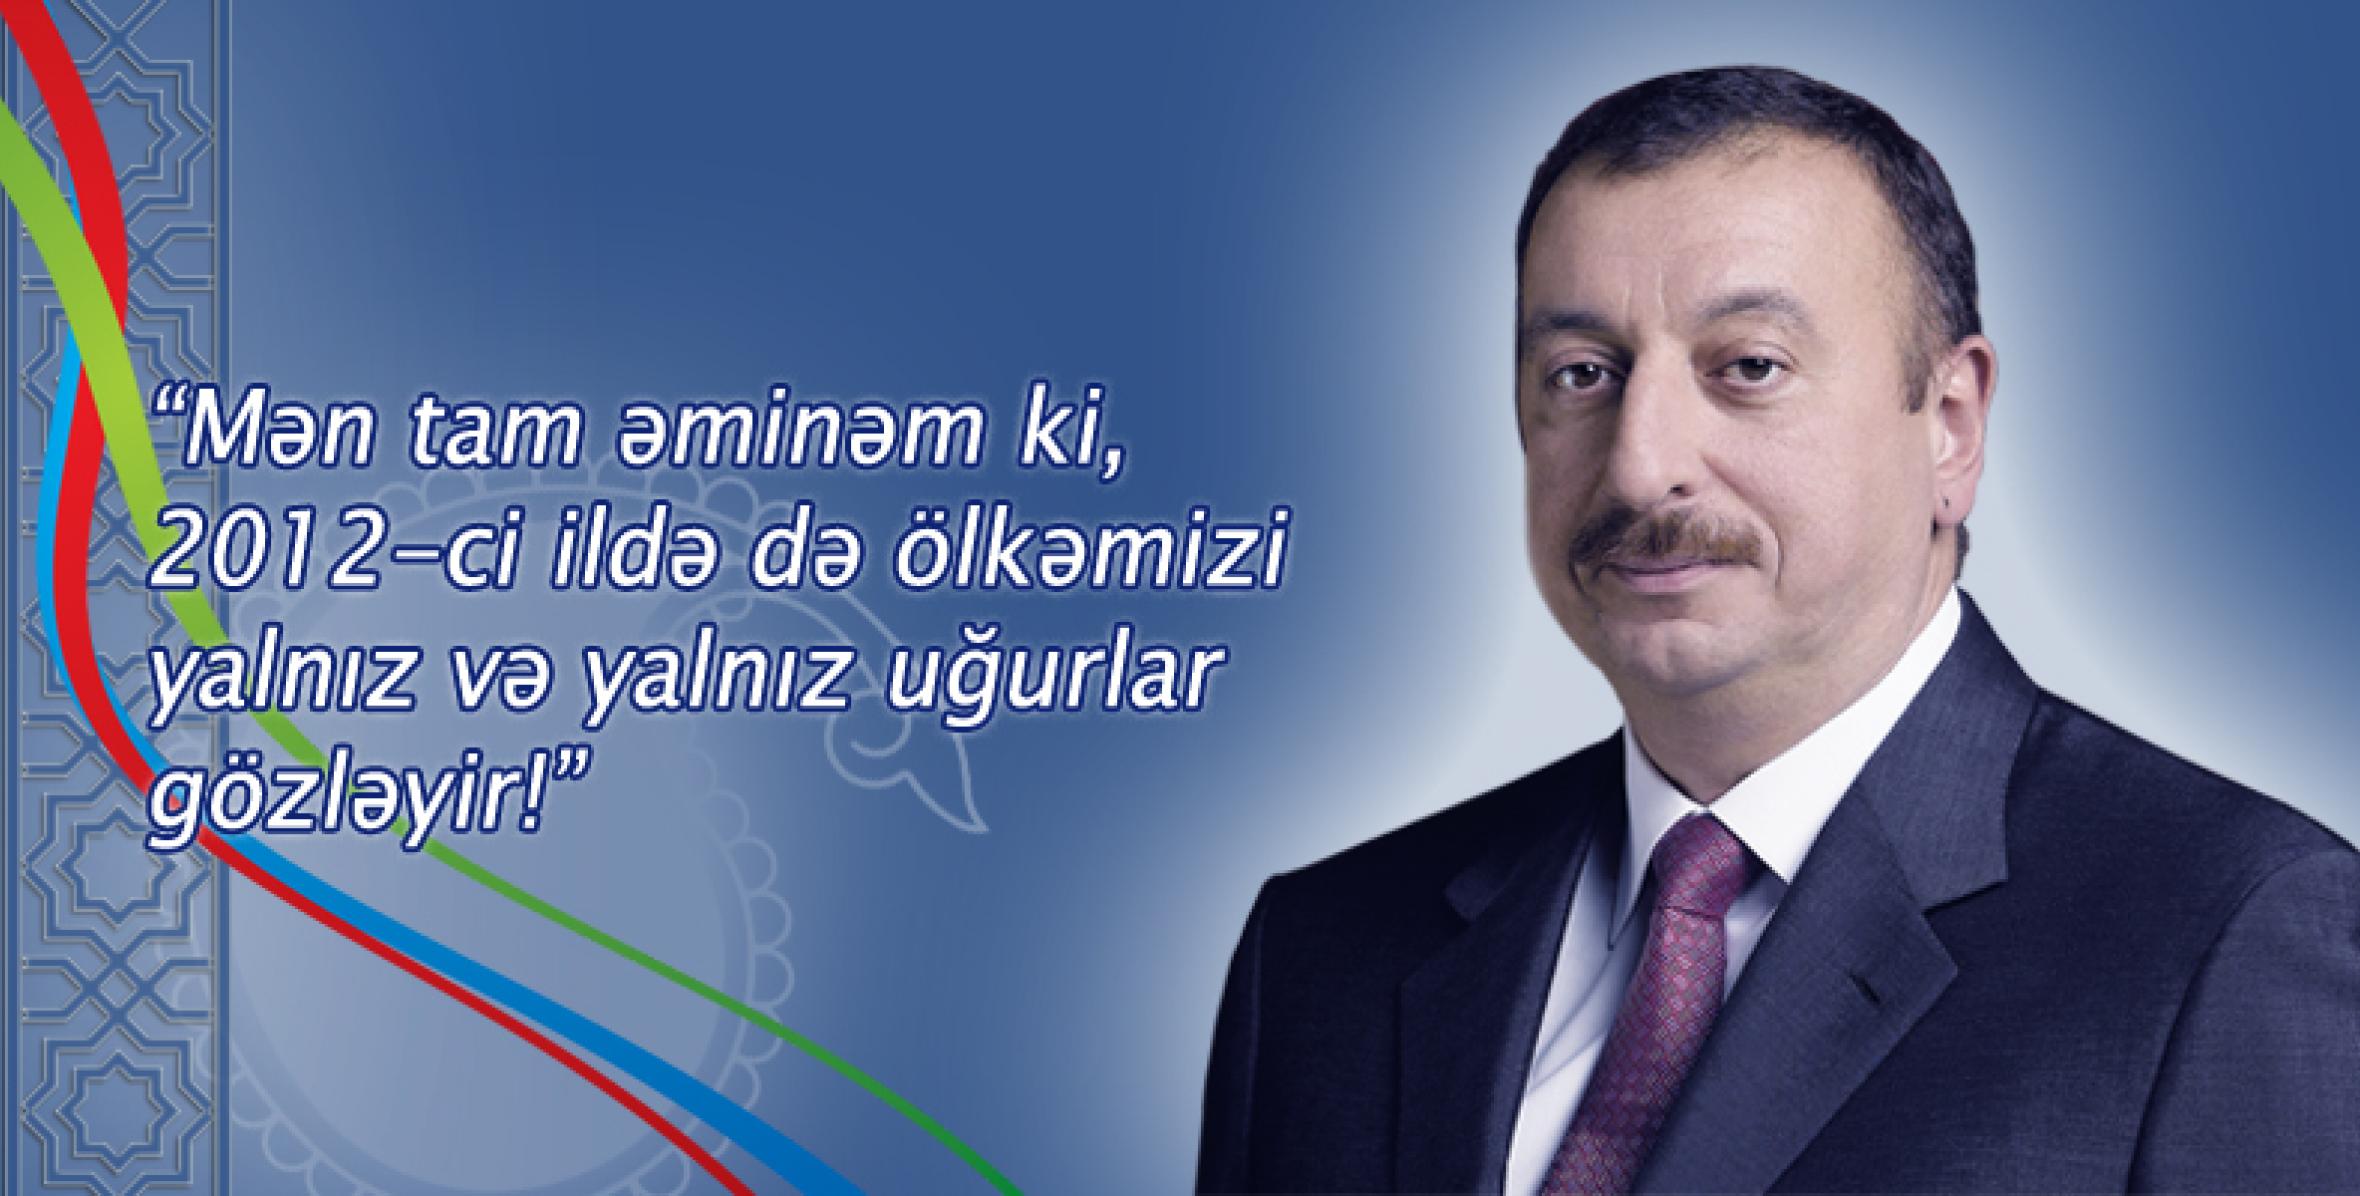 Congratulatory message of Ilham Aliyev to the people of Azerbaijan on the occasion of the Day of Solidarity of Azerbaijanis of the World and New Year